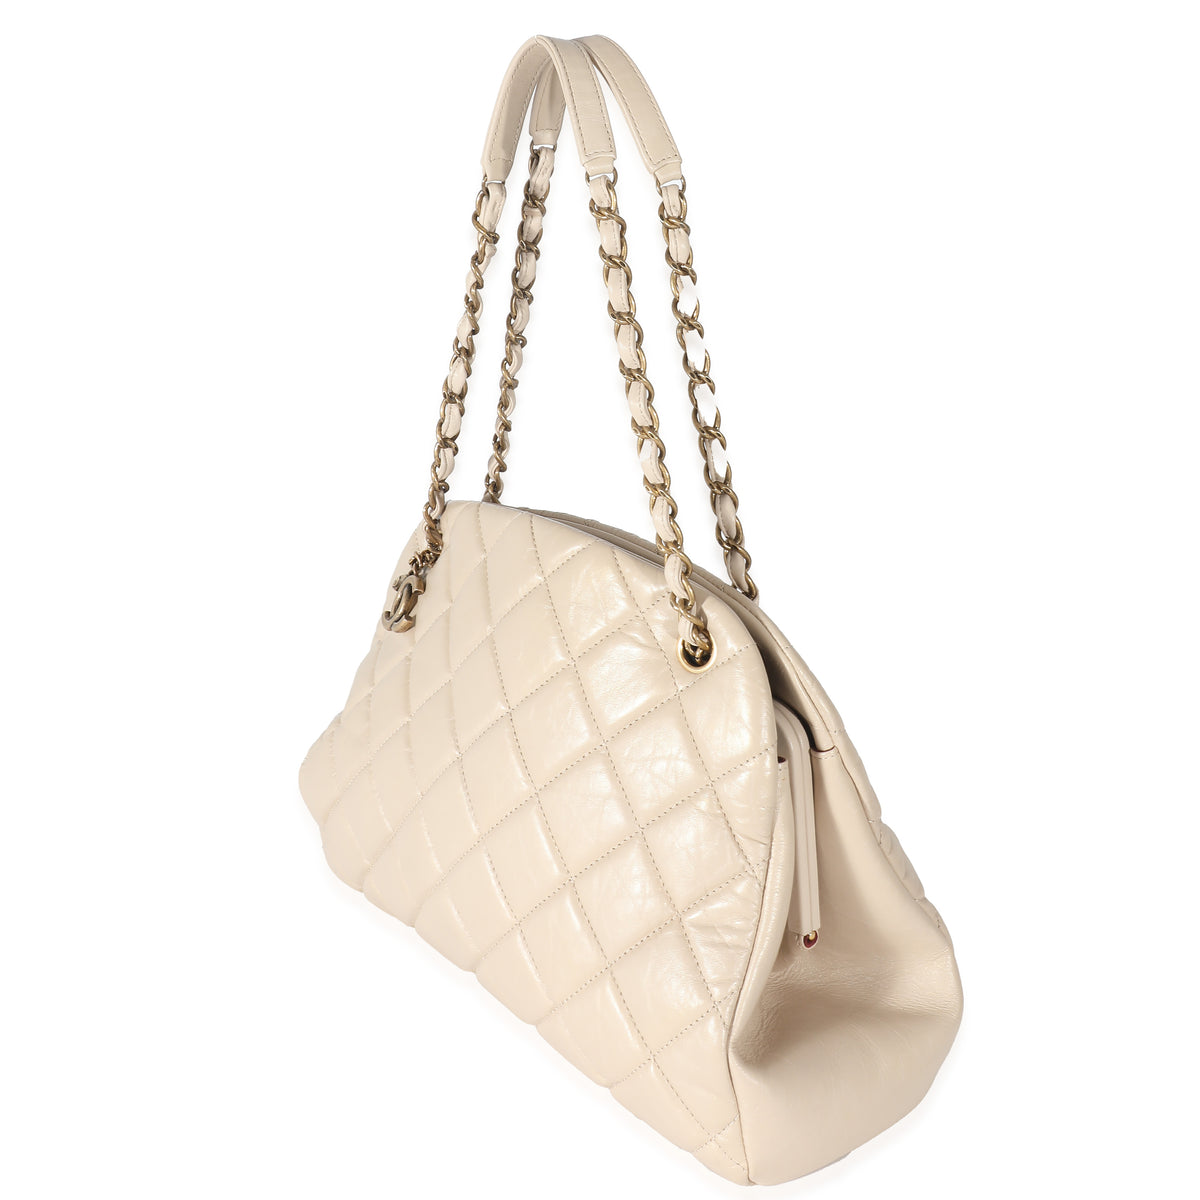 Chanel Beige Crinkled Leather Large Mademoiselle Just Bowling Bag